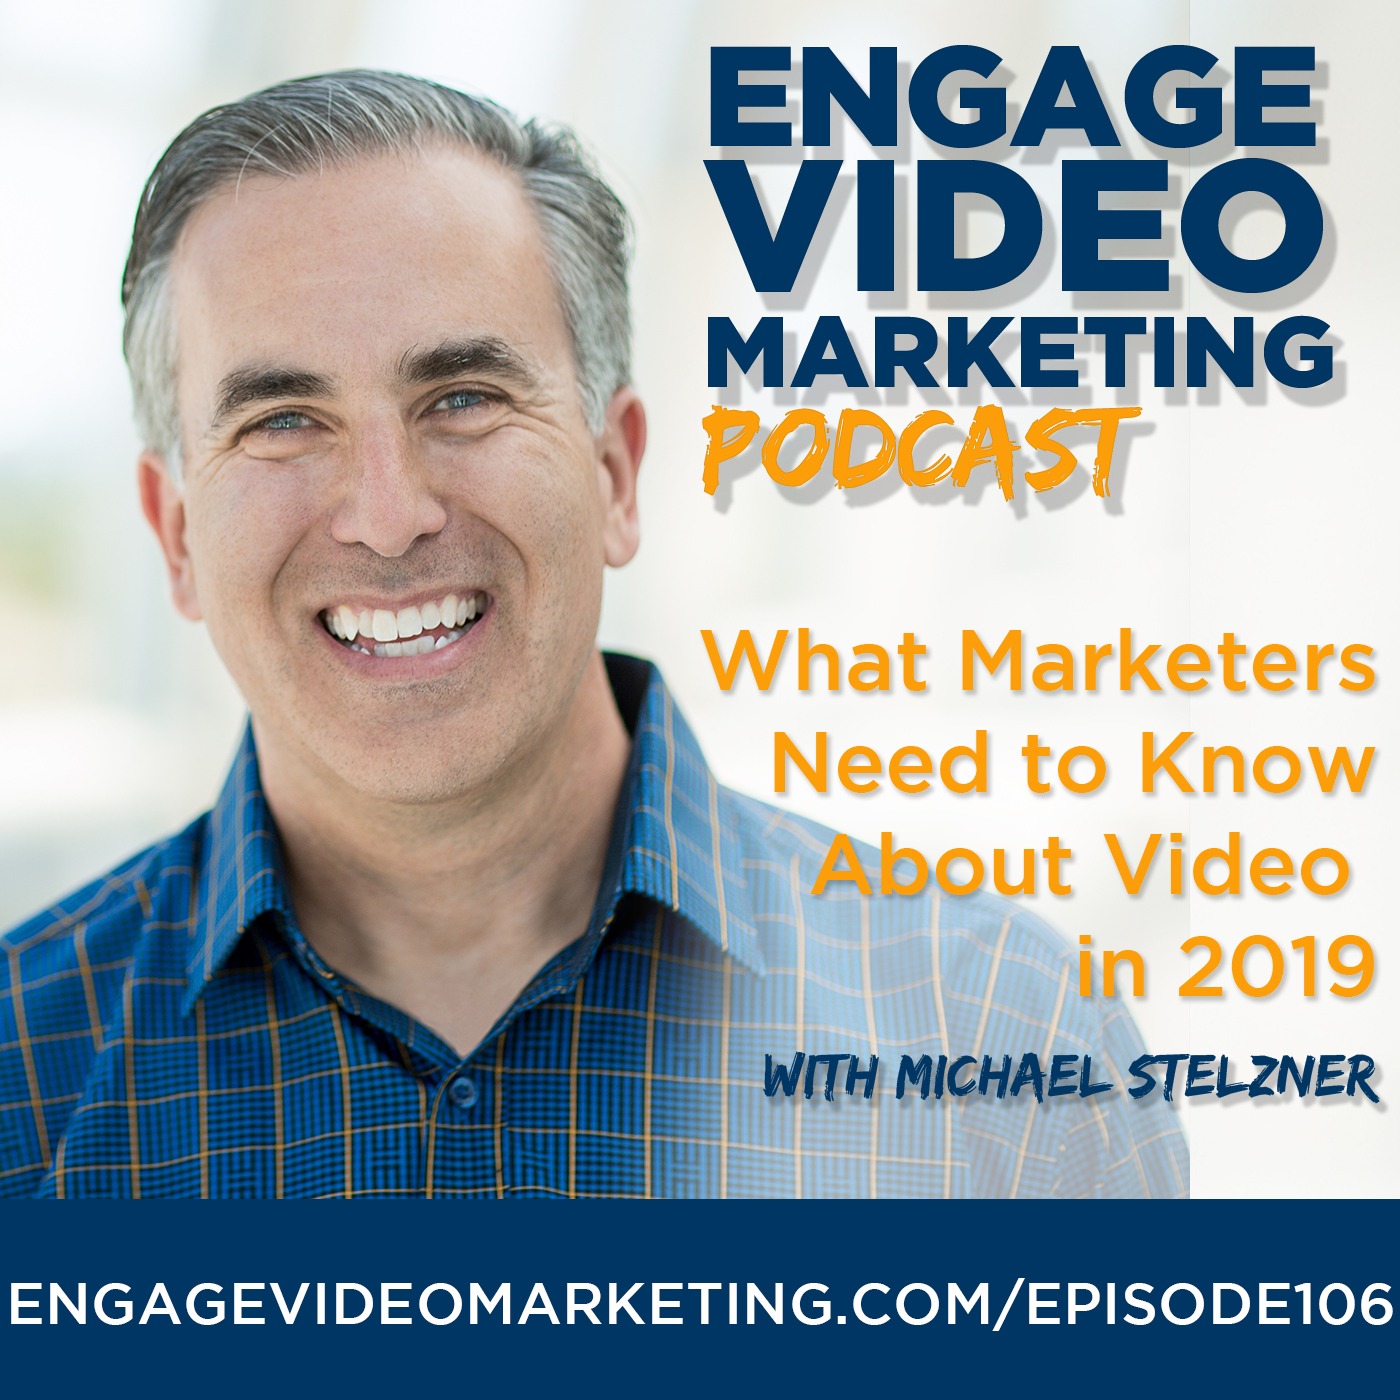 What Marketers Need to Know About Video in 2019 with Michael Stelzner